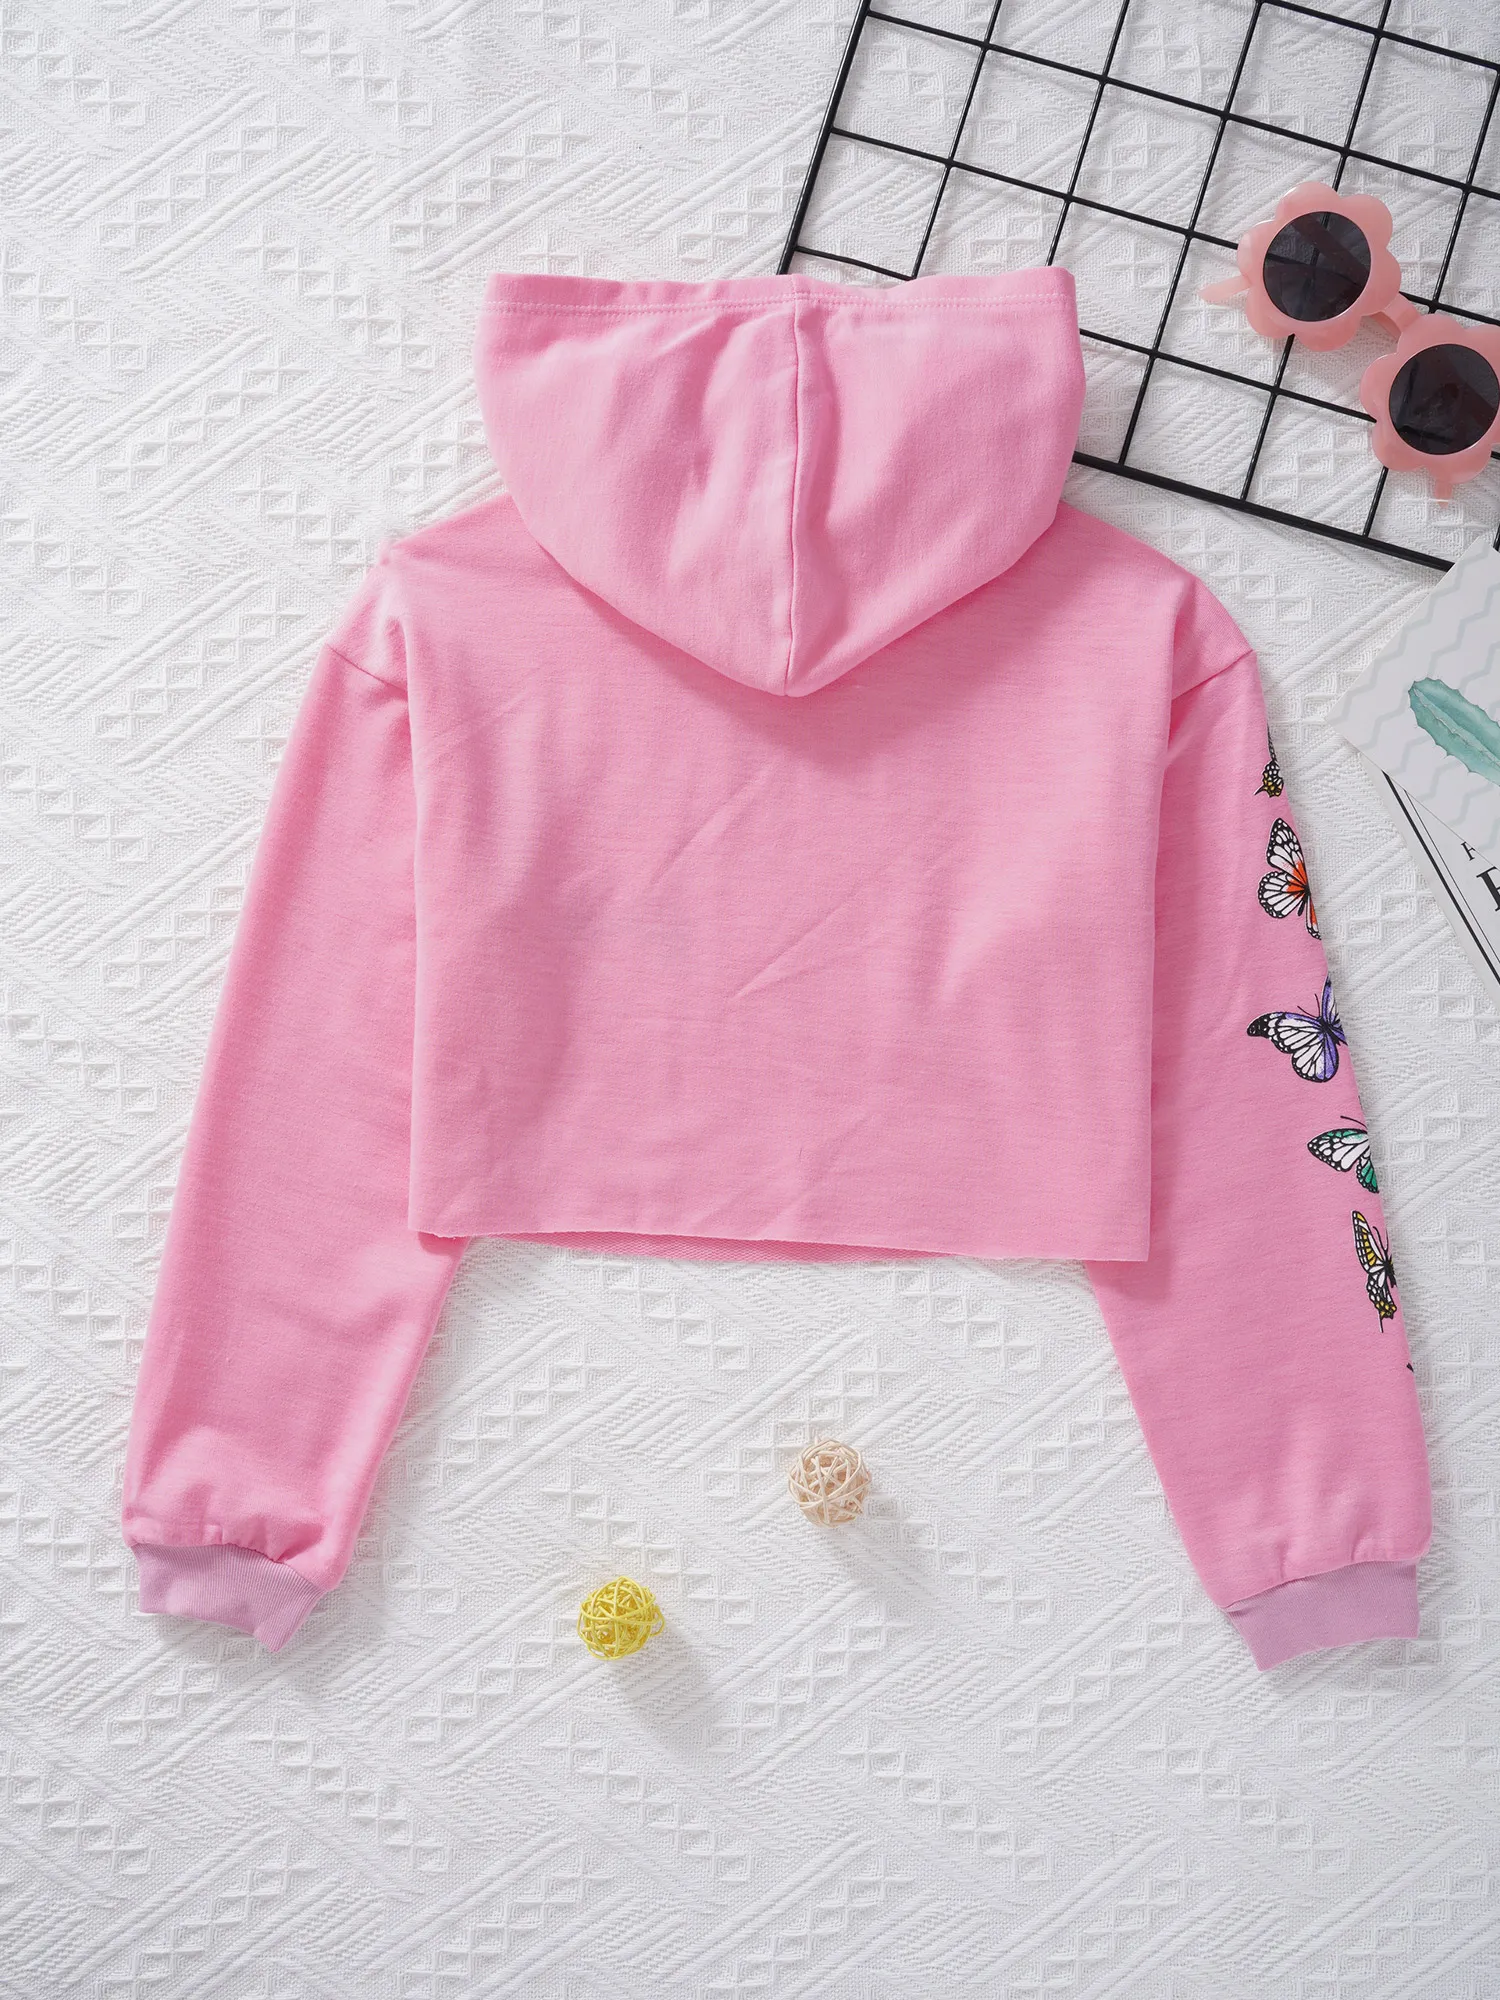 Hip Hop Girls Clothing Kids Hooded Sweatshirt Cotton Long Sleeves Cropped T-Shirts Tops Modern Jazz Dance Gym Workout Clothes baby hooded shirt